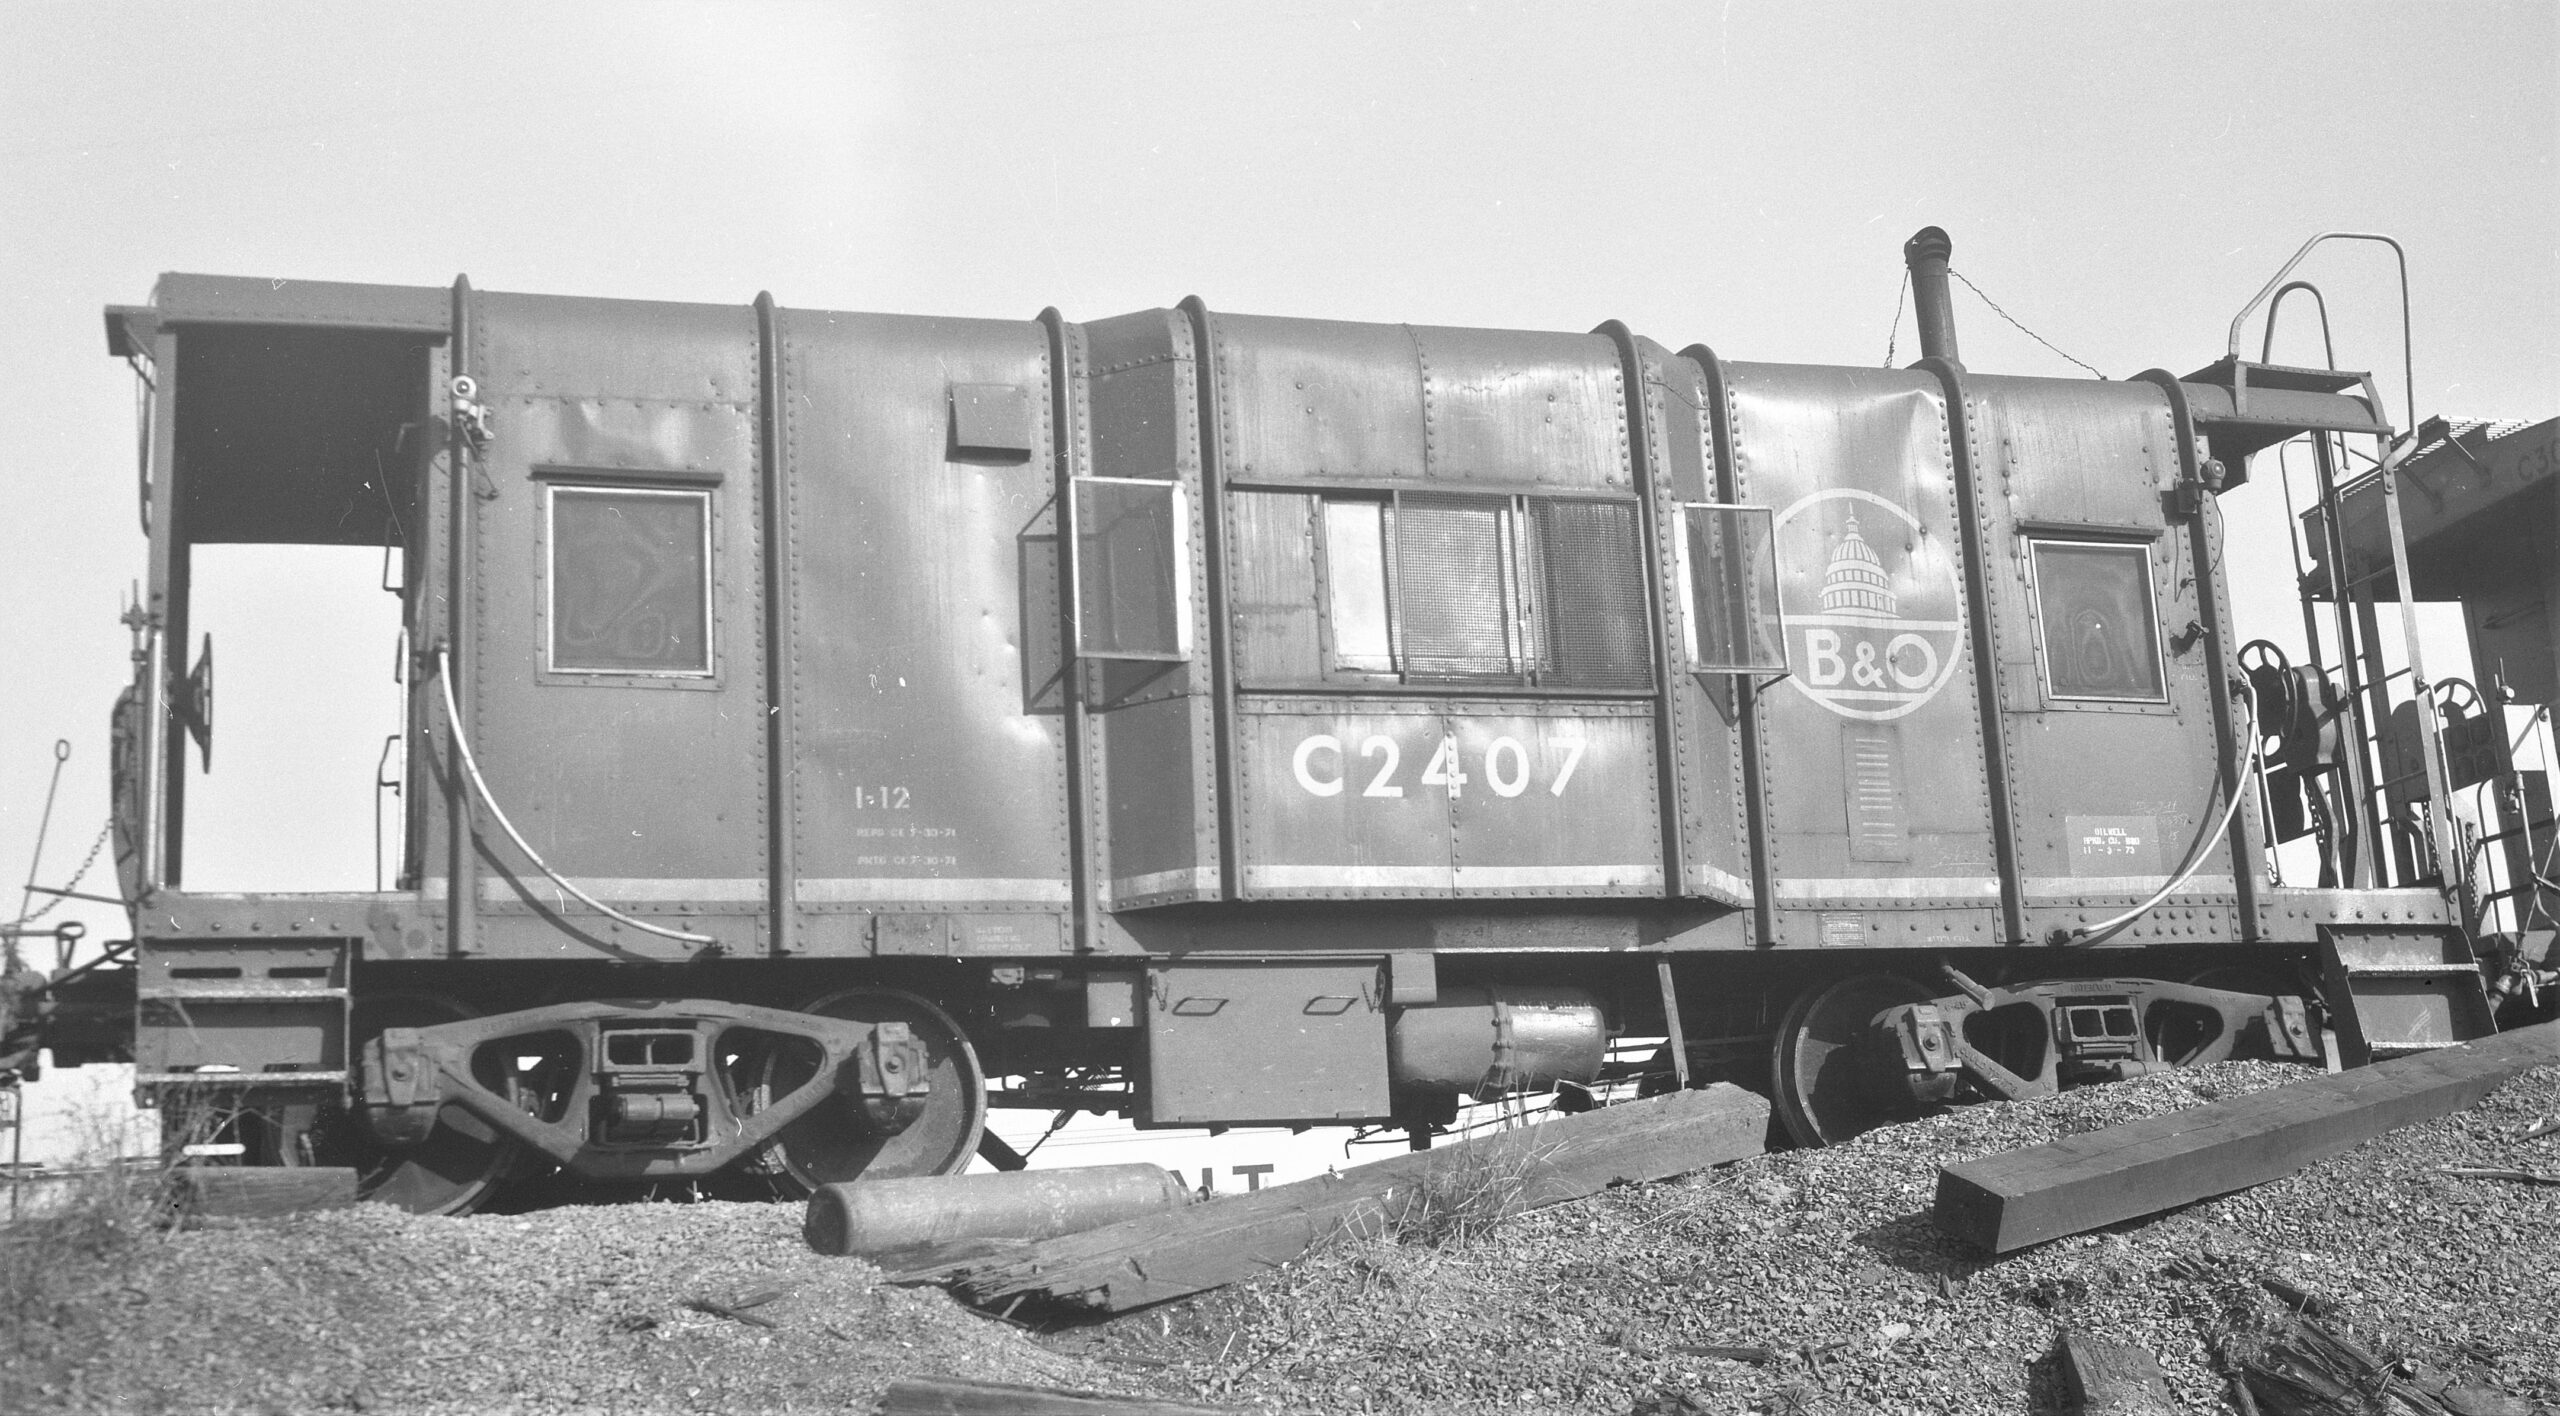 Baltimore and Ohio | Elizabethport, New Jersey | Class I-12 Caboose C-2407 | April 24, 1975 | H.B. Olsen photograph